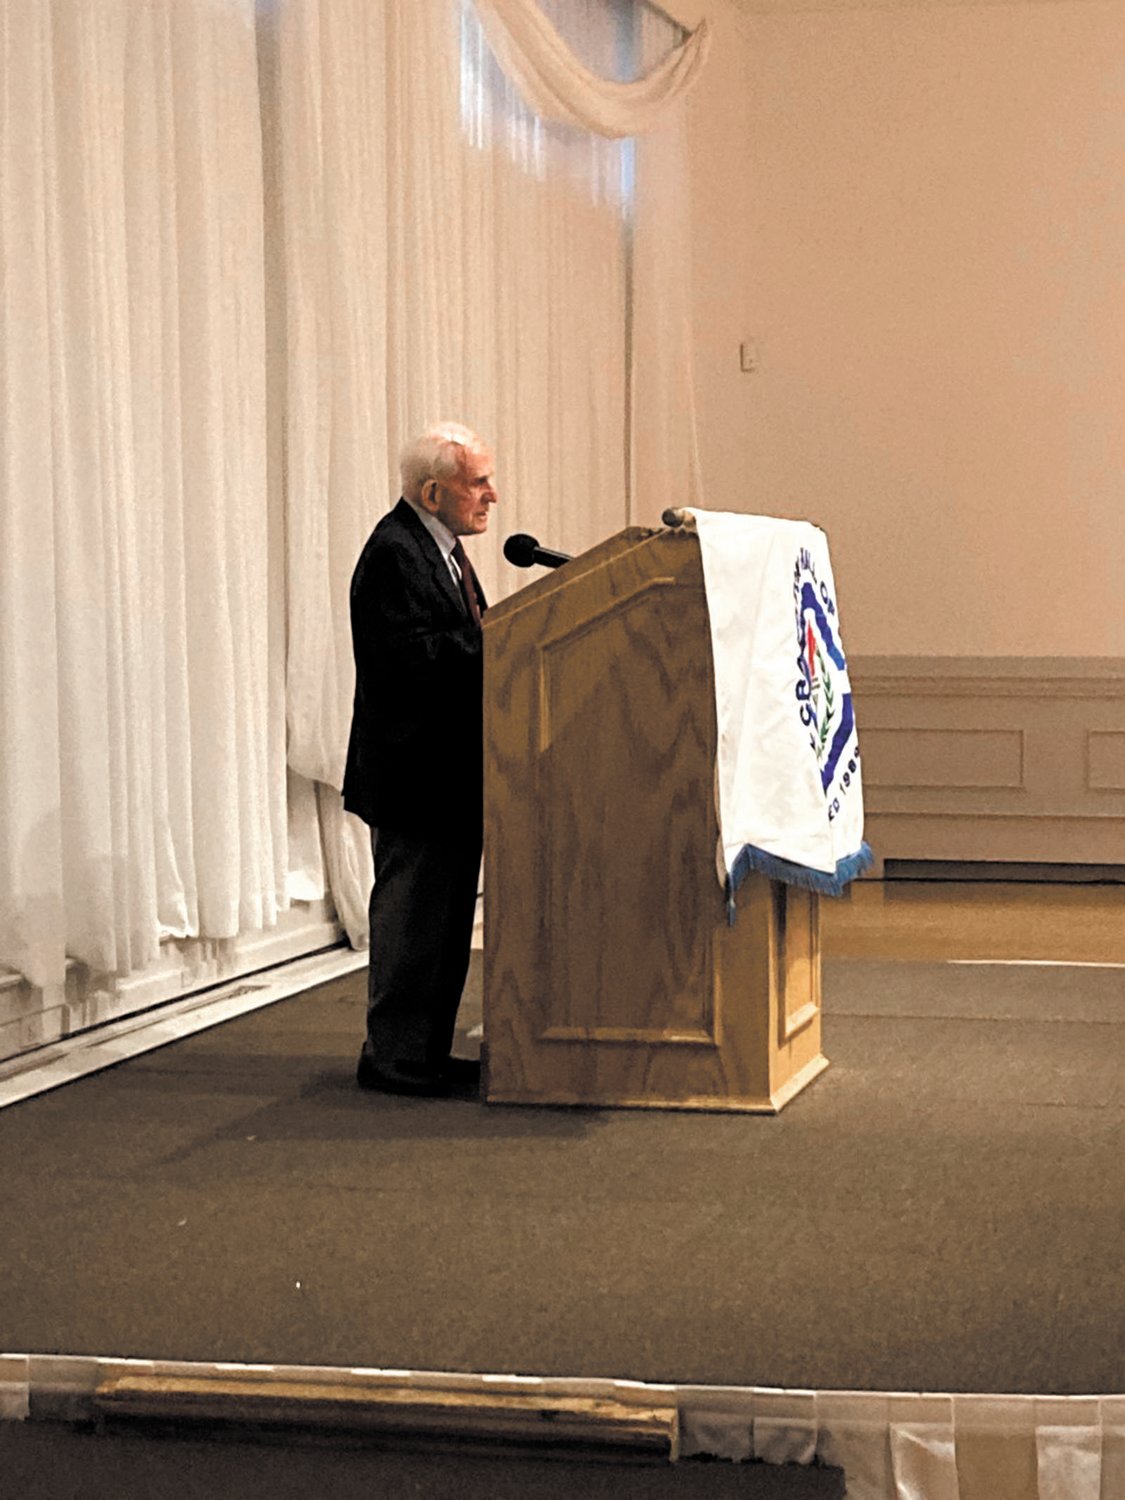 COMMUNITY SERVICE AWARD: Frank Del Santo received the Cranston Hall of Fame Community Service Award which is new to the organization this year. (Herald photo)